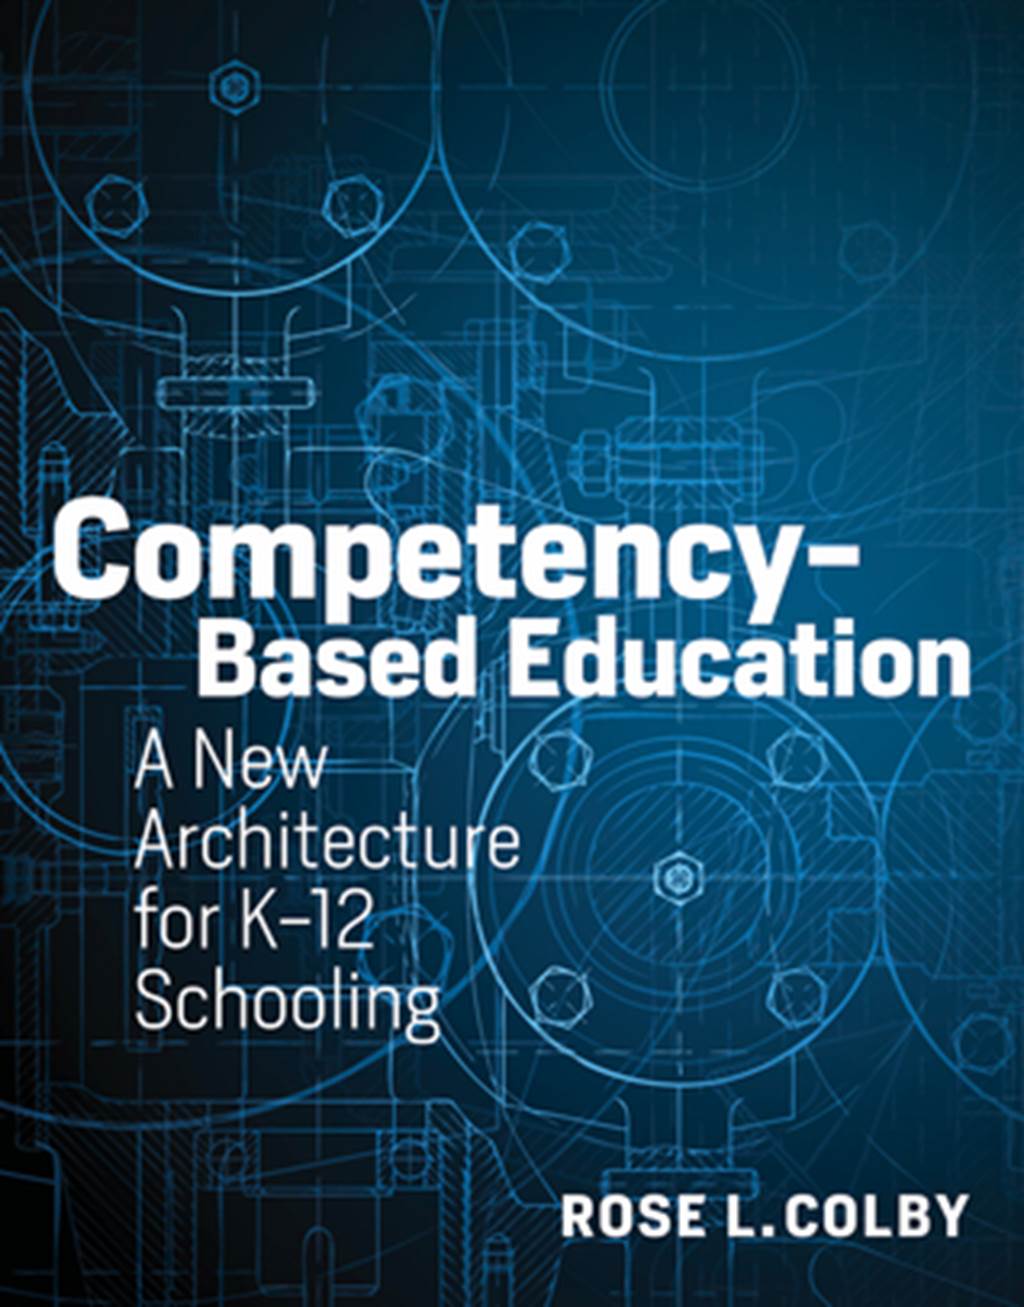 Competency-Based Education: A New Architecture for K-12 Schooling - image